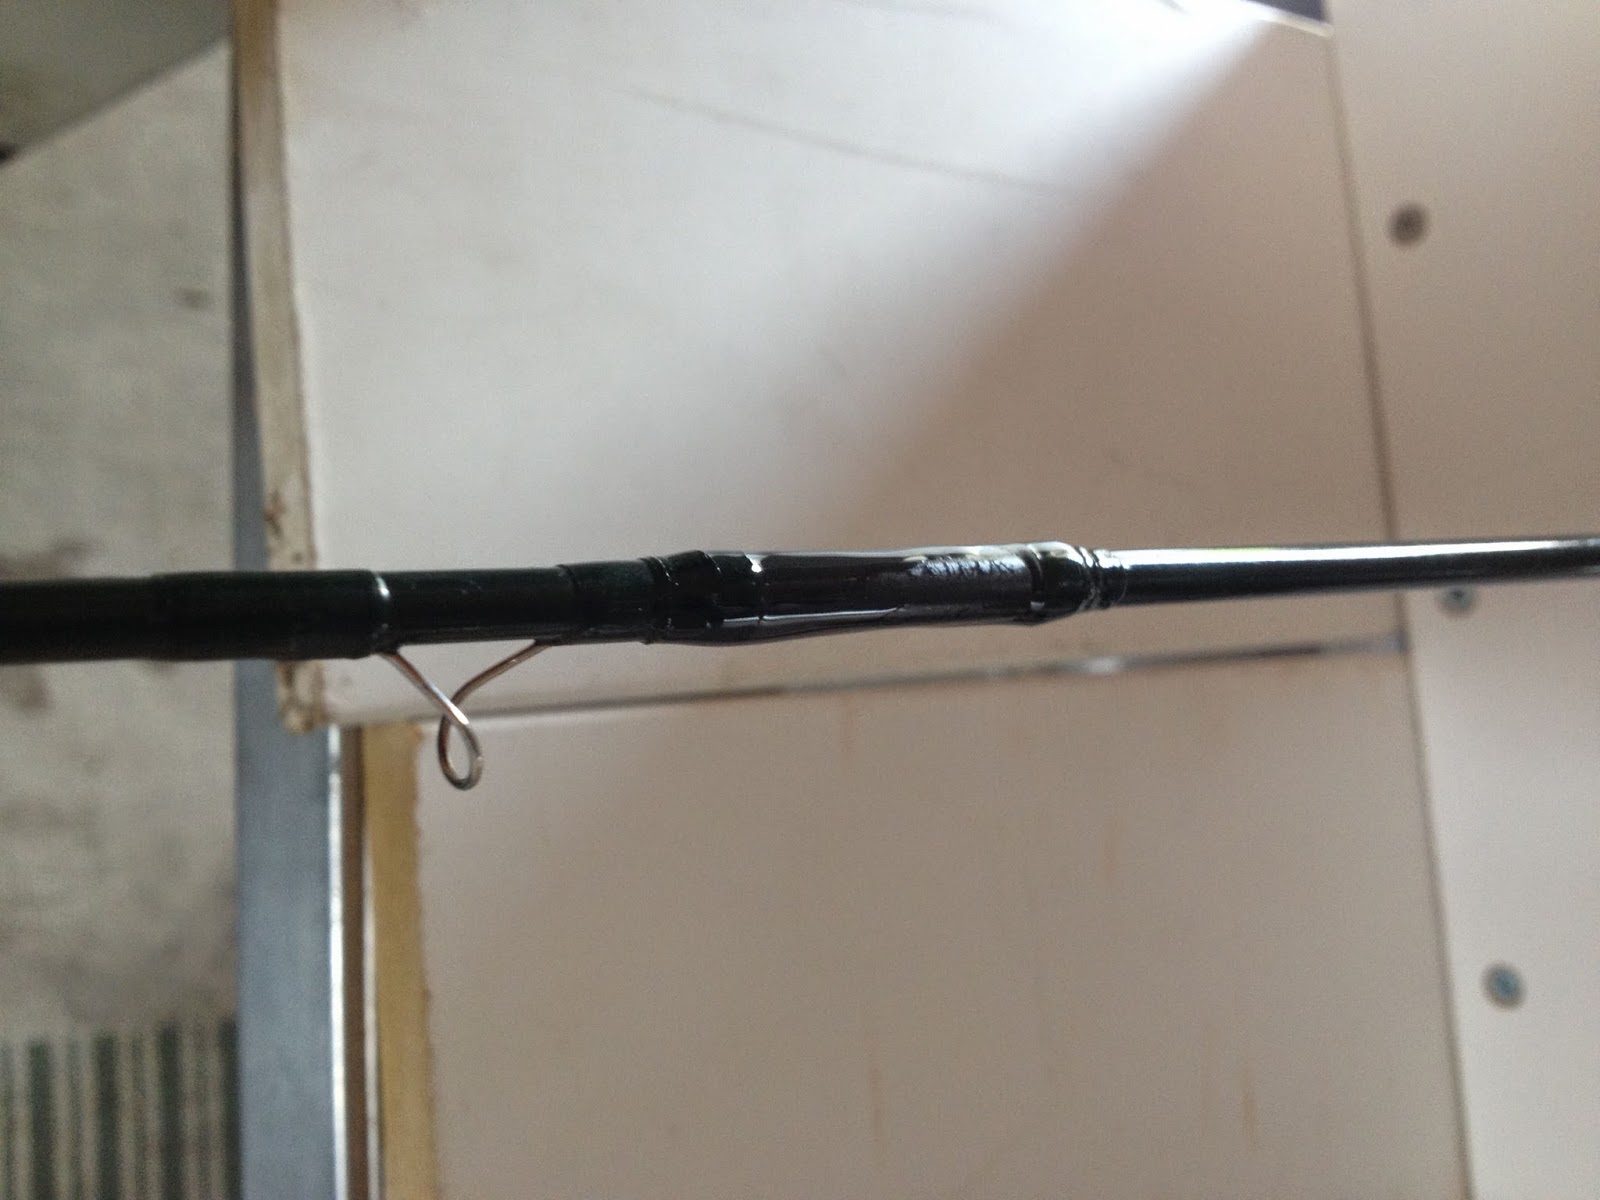 Fish B4U Fly: Mending a broken graphite fly rod with a piece of